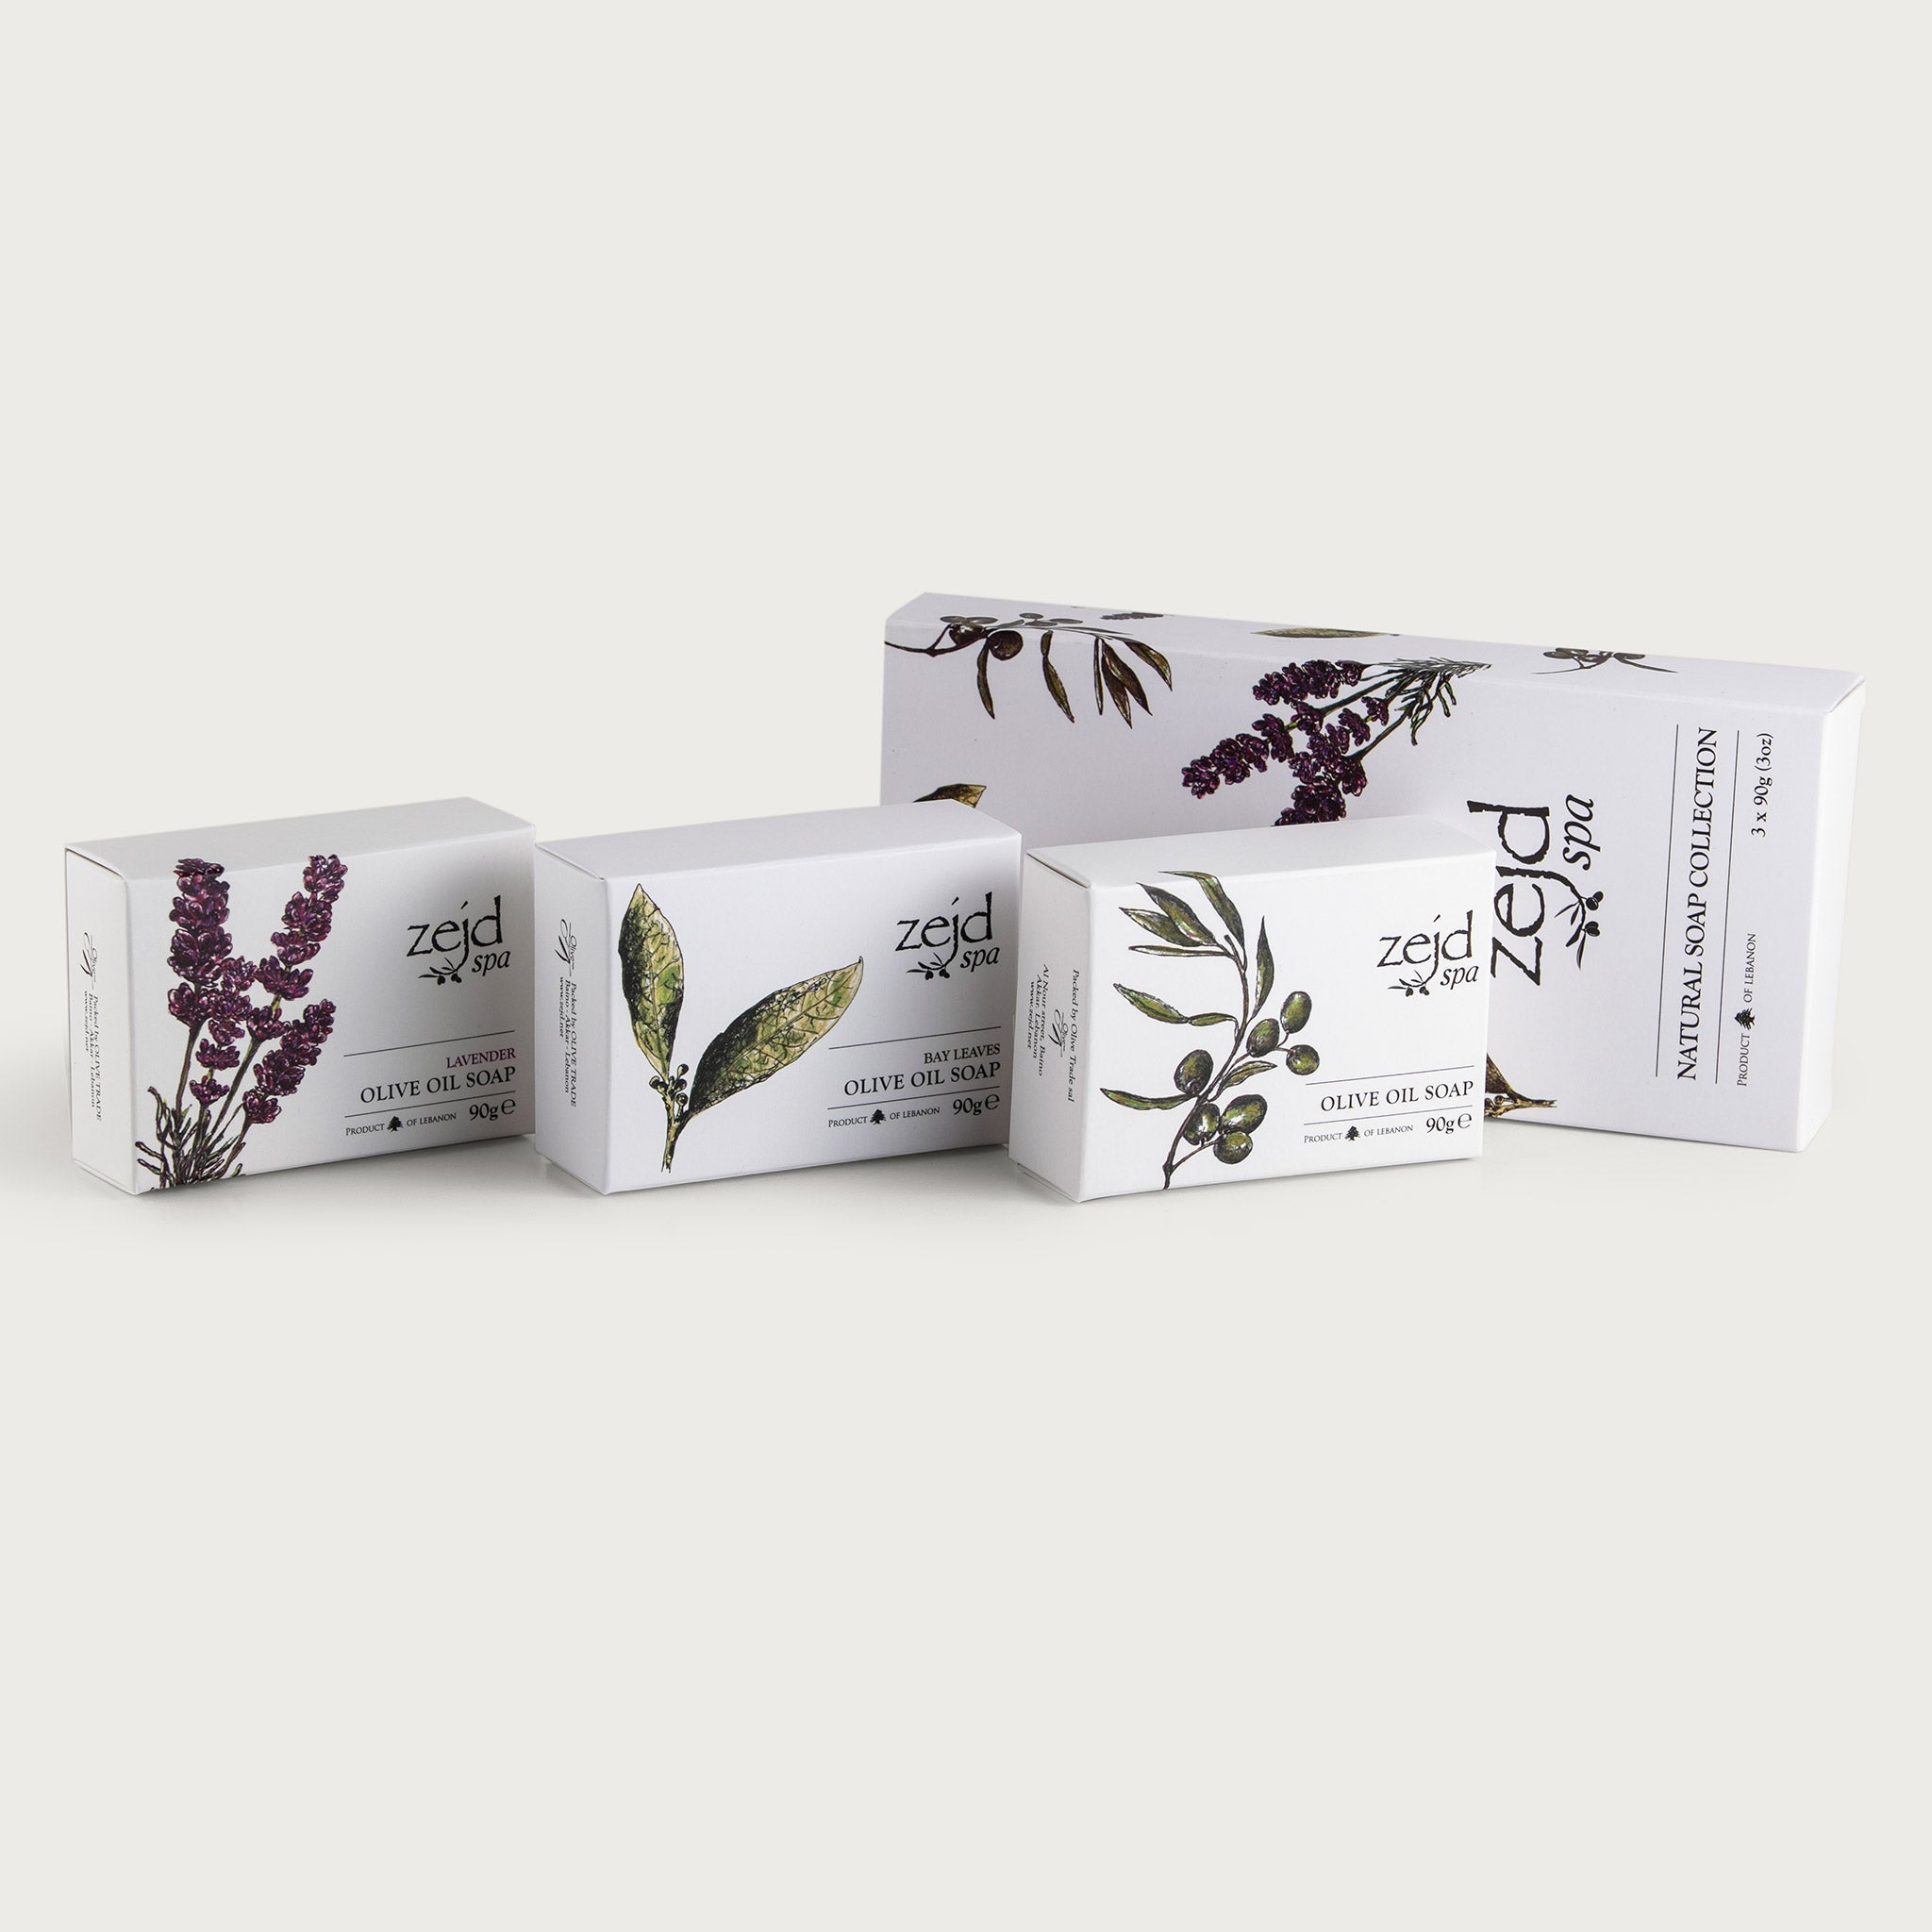 This beautifully designed white box houses three individually packaged bars of soap inside. Each package is white in color and features images representing their individual scents: lavender, laurel, and olive oil.